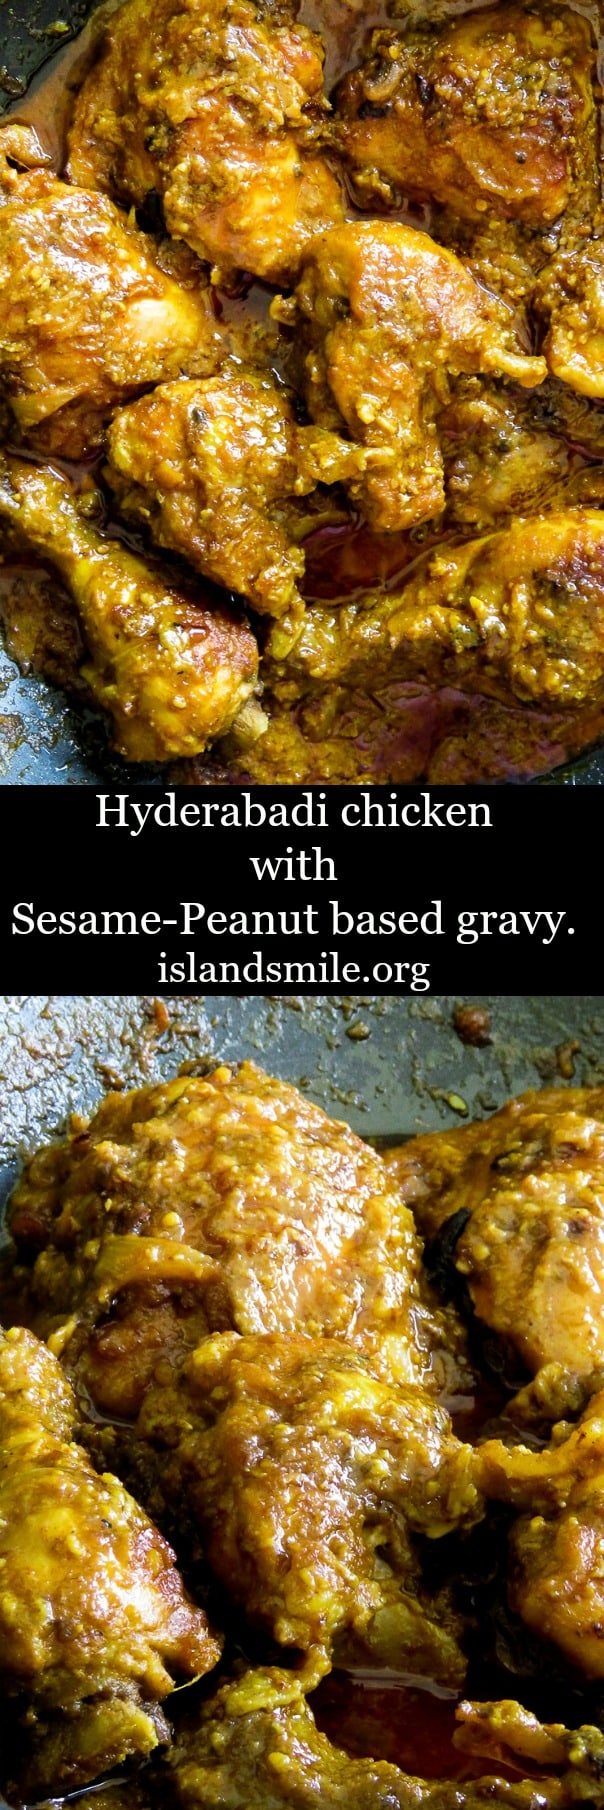 Hyderabadi chicken korma.  A chicken korma recipe from the Hyderabadi region. It's one of the popular Indian chicken curry recipes you'll want to taste. Made with a peanut-sesame gravy base, this Indian curry makes a perfect one-pot meal to share with friends and loved ones.